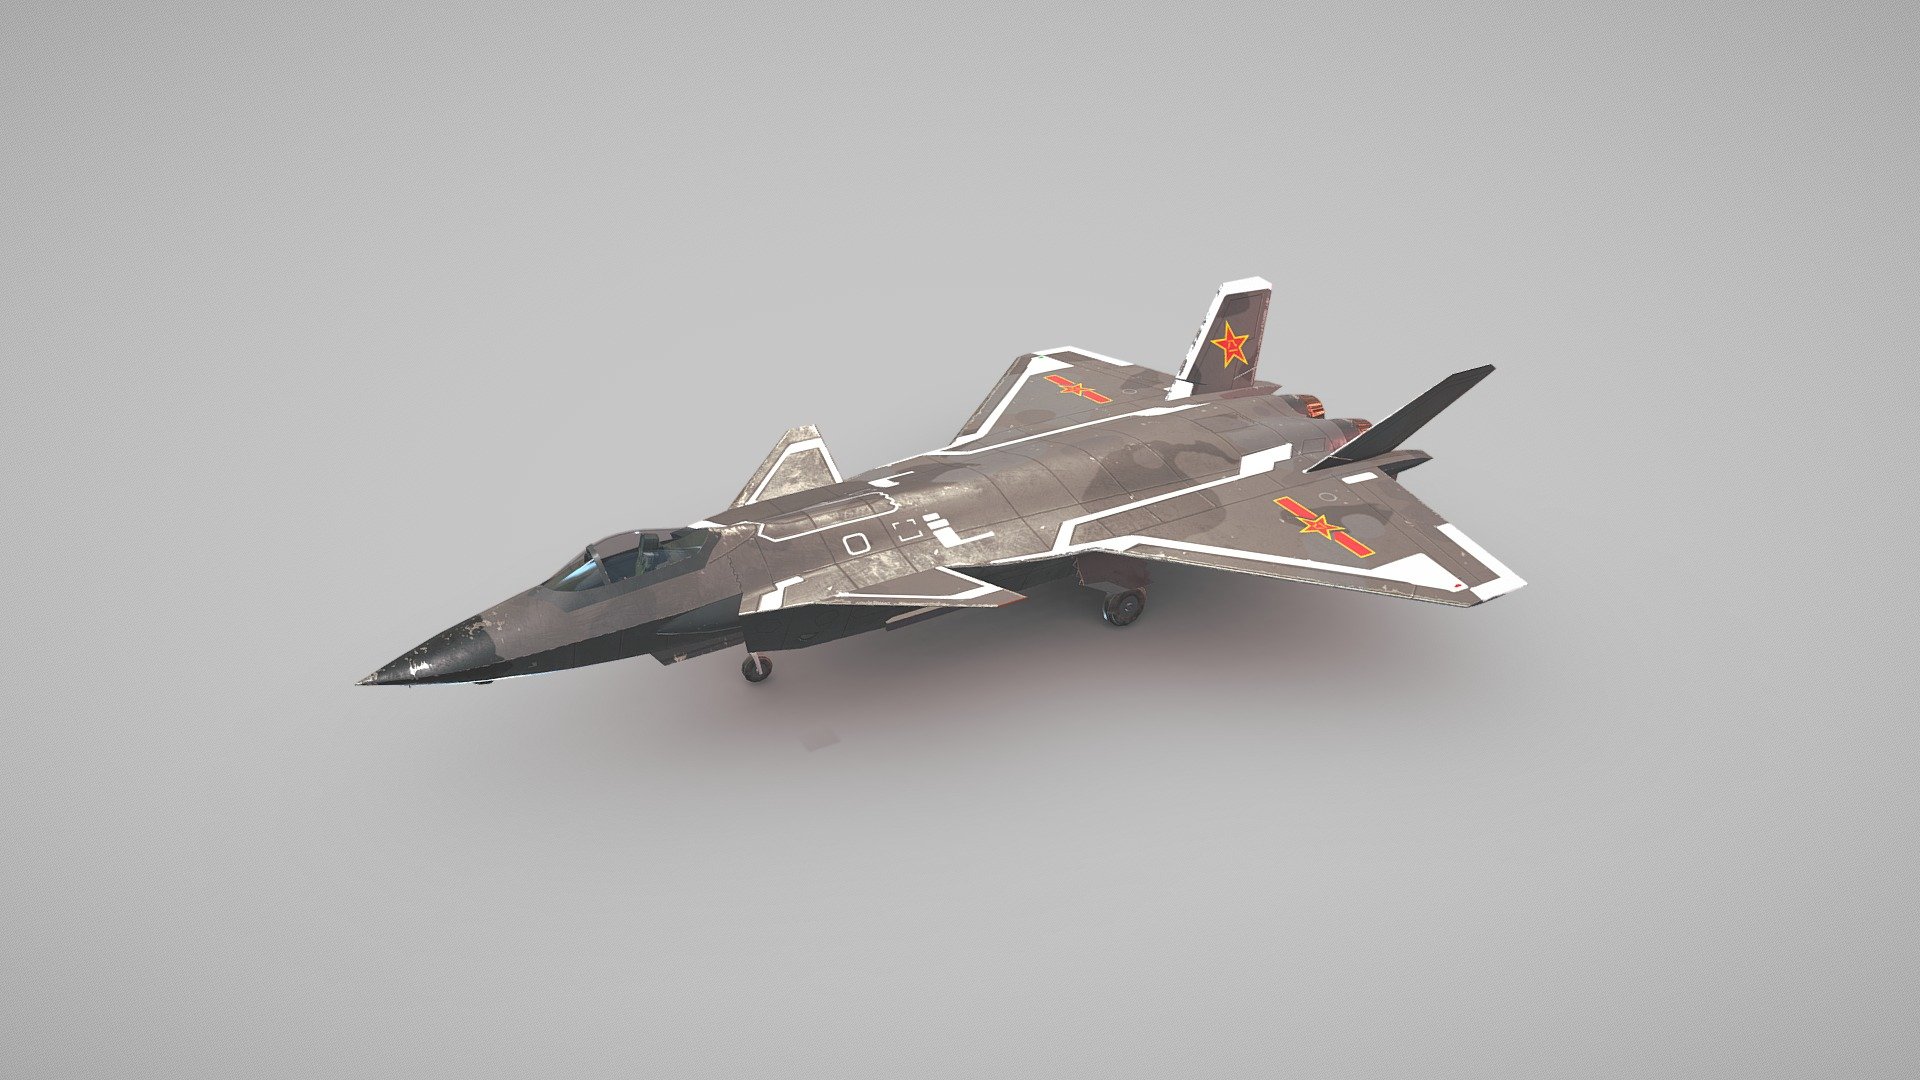 J-20 Fighter Jet


-Created in 3ds MAX 2018 saved as 2015 both files are included no plugins used.
-Low-poly ready to use in Games.
-Separate objects for animation.
-Textures are in PNG format PBR metalness 2 sets(AO, Albedo, Normal, Roughness, Metalness)
-File Units: meter
-Available formats:MAX 2018 and 2015, OBJ, MTL, FBX, .tbscene.
-Inspect the model completely in marmoset viewer in 2nd preview image
-If you need any other file format you can always request it.
-All formats include materials and texture

The Chengdu J-20, also known as Mighty Dragon, is a twinjet all-weather stealth fighter aircraft developed by China's Chengdu Aerospace Corporation for the People's Liberation Army Air Force - Chengdu J-20 Stealth Fighter Aircraft - Buy Royalty Free 3D model by MaX3Dd 3d model